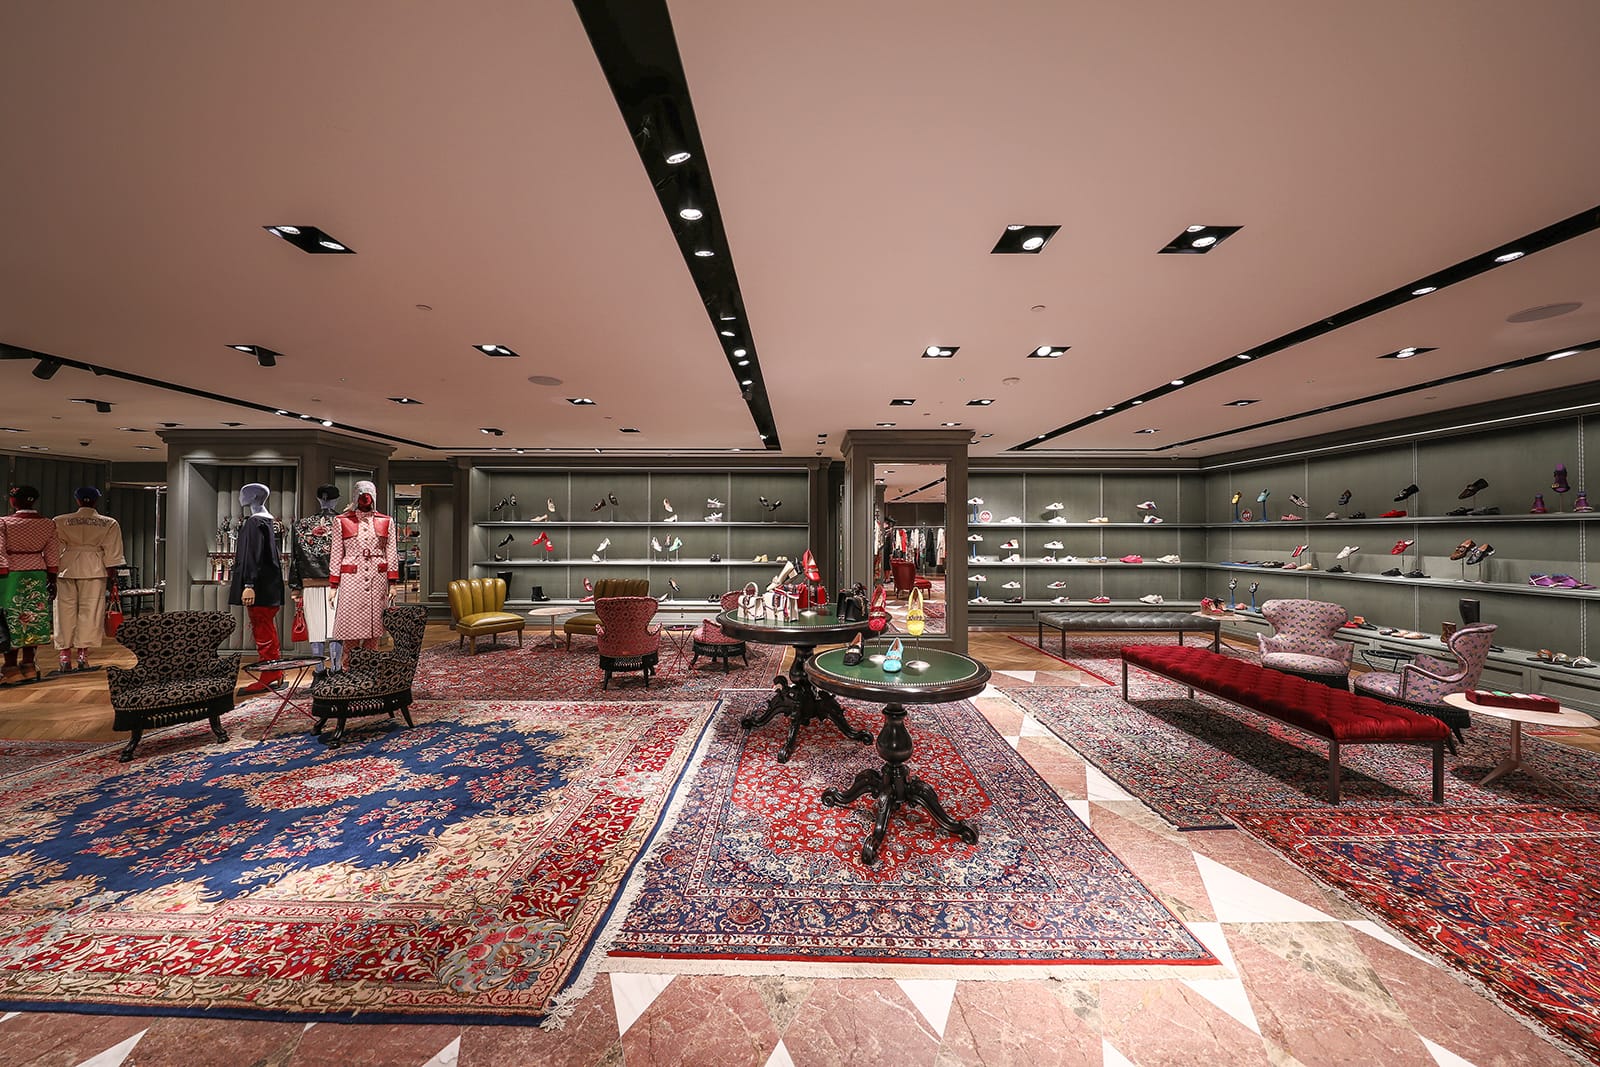 gucci sloane street opening times